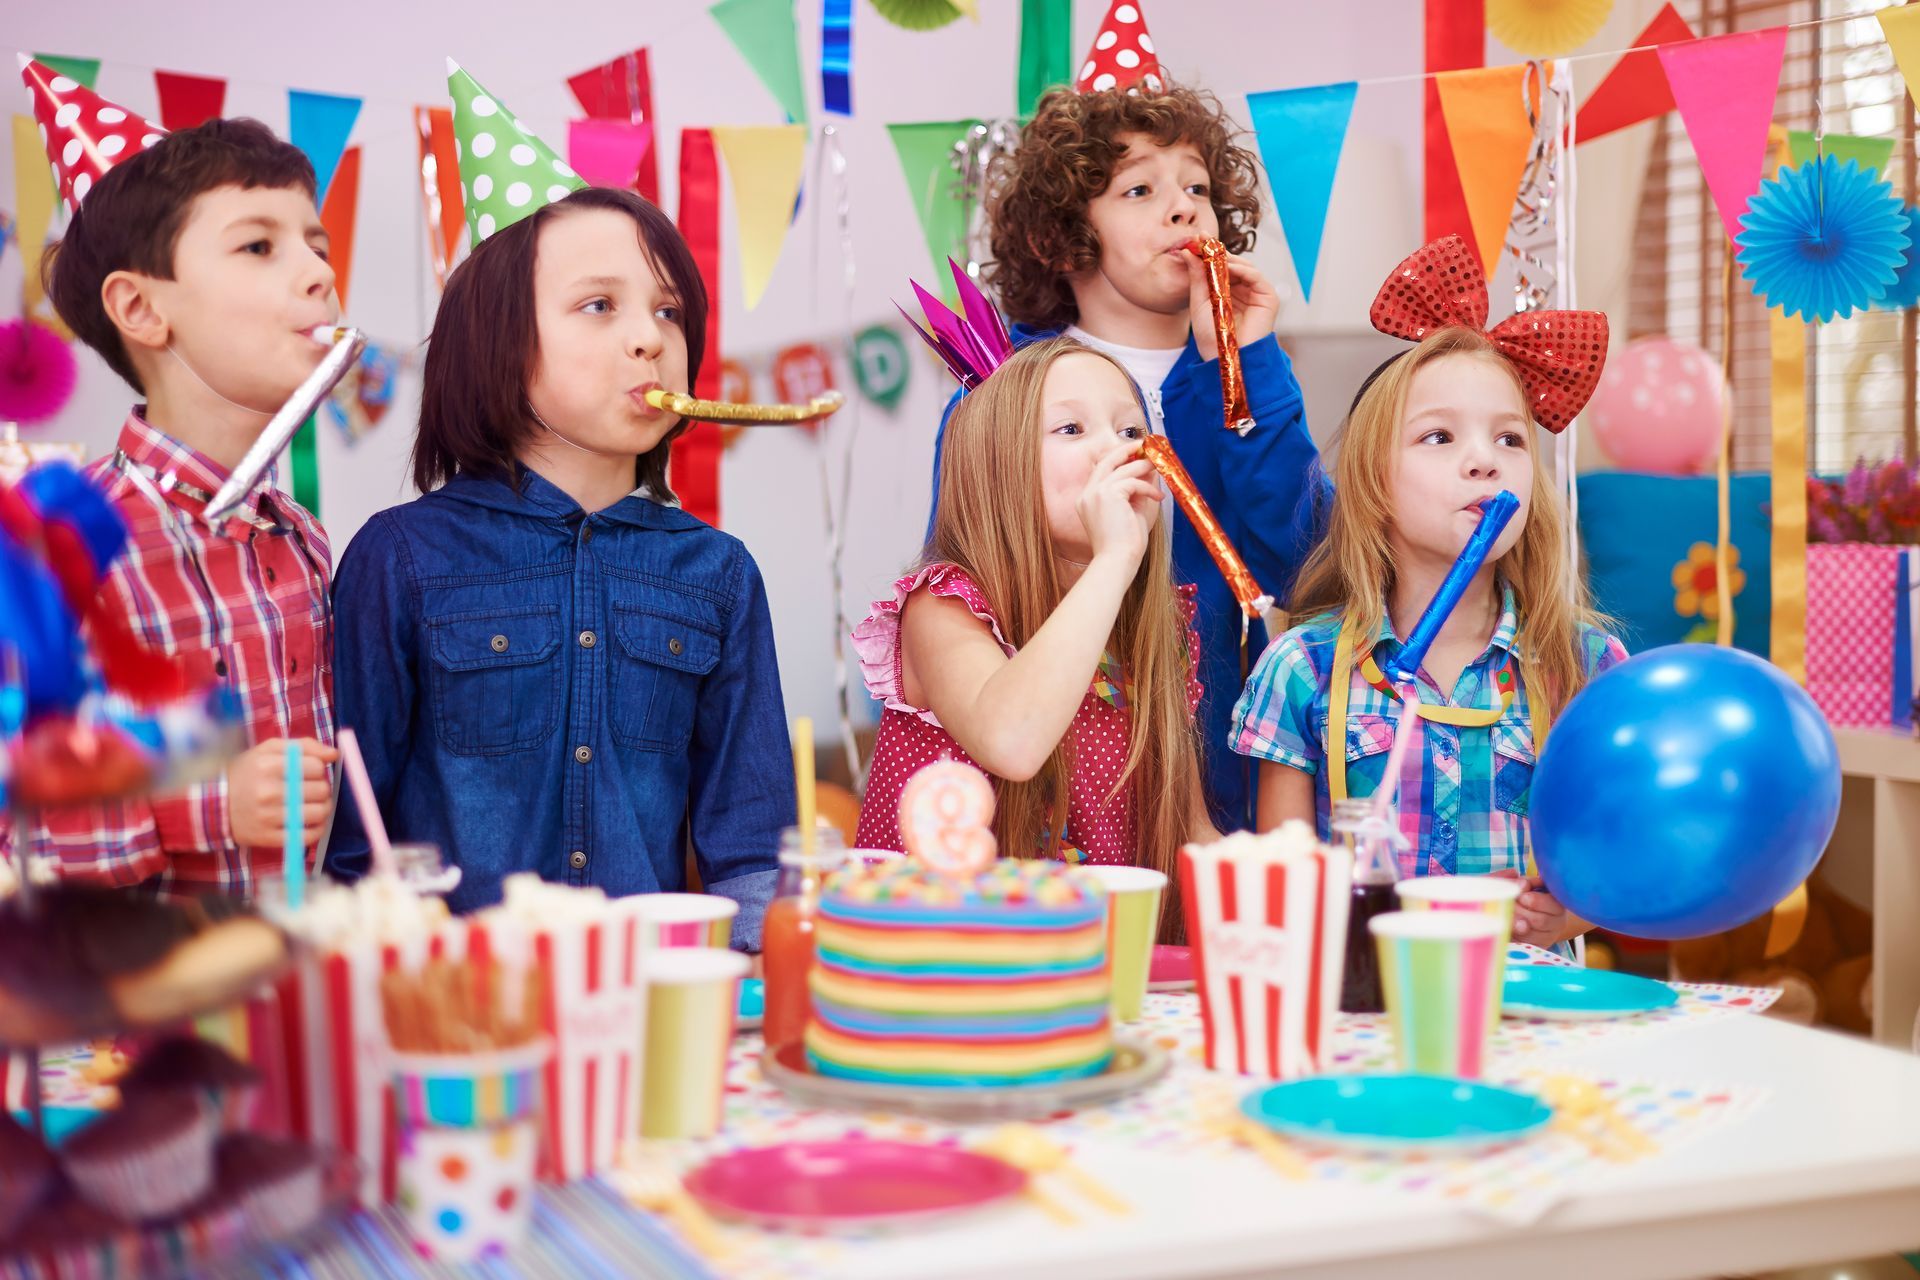 a group of children are blowing party horns at a birthday party .